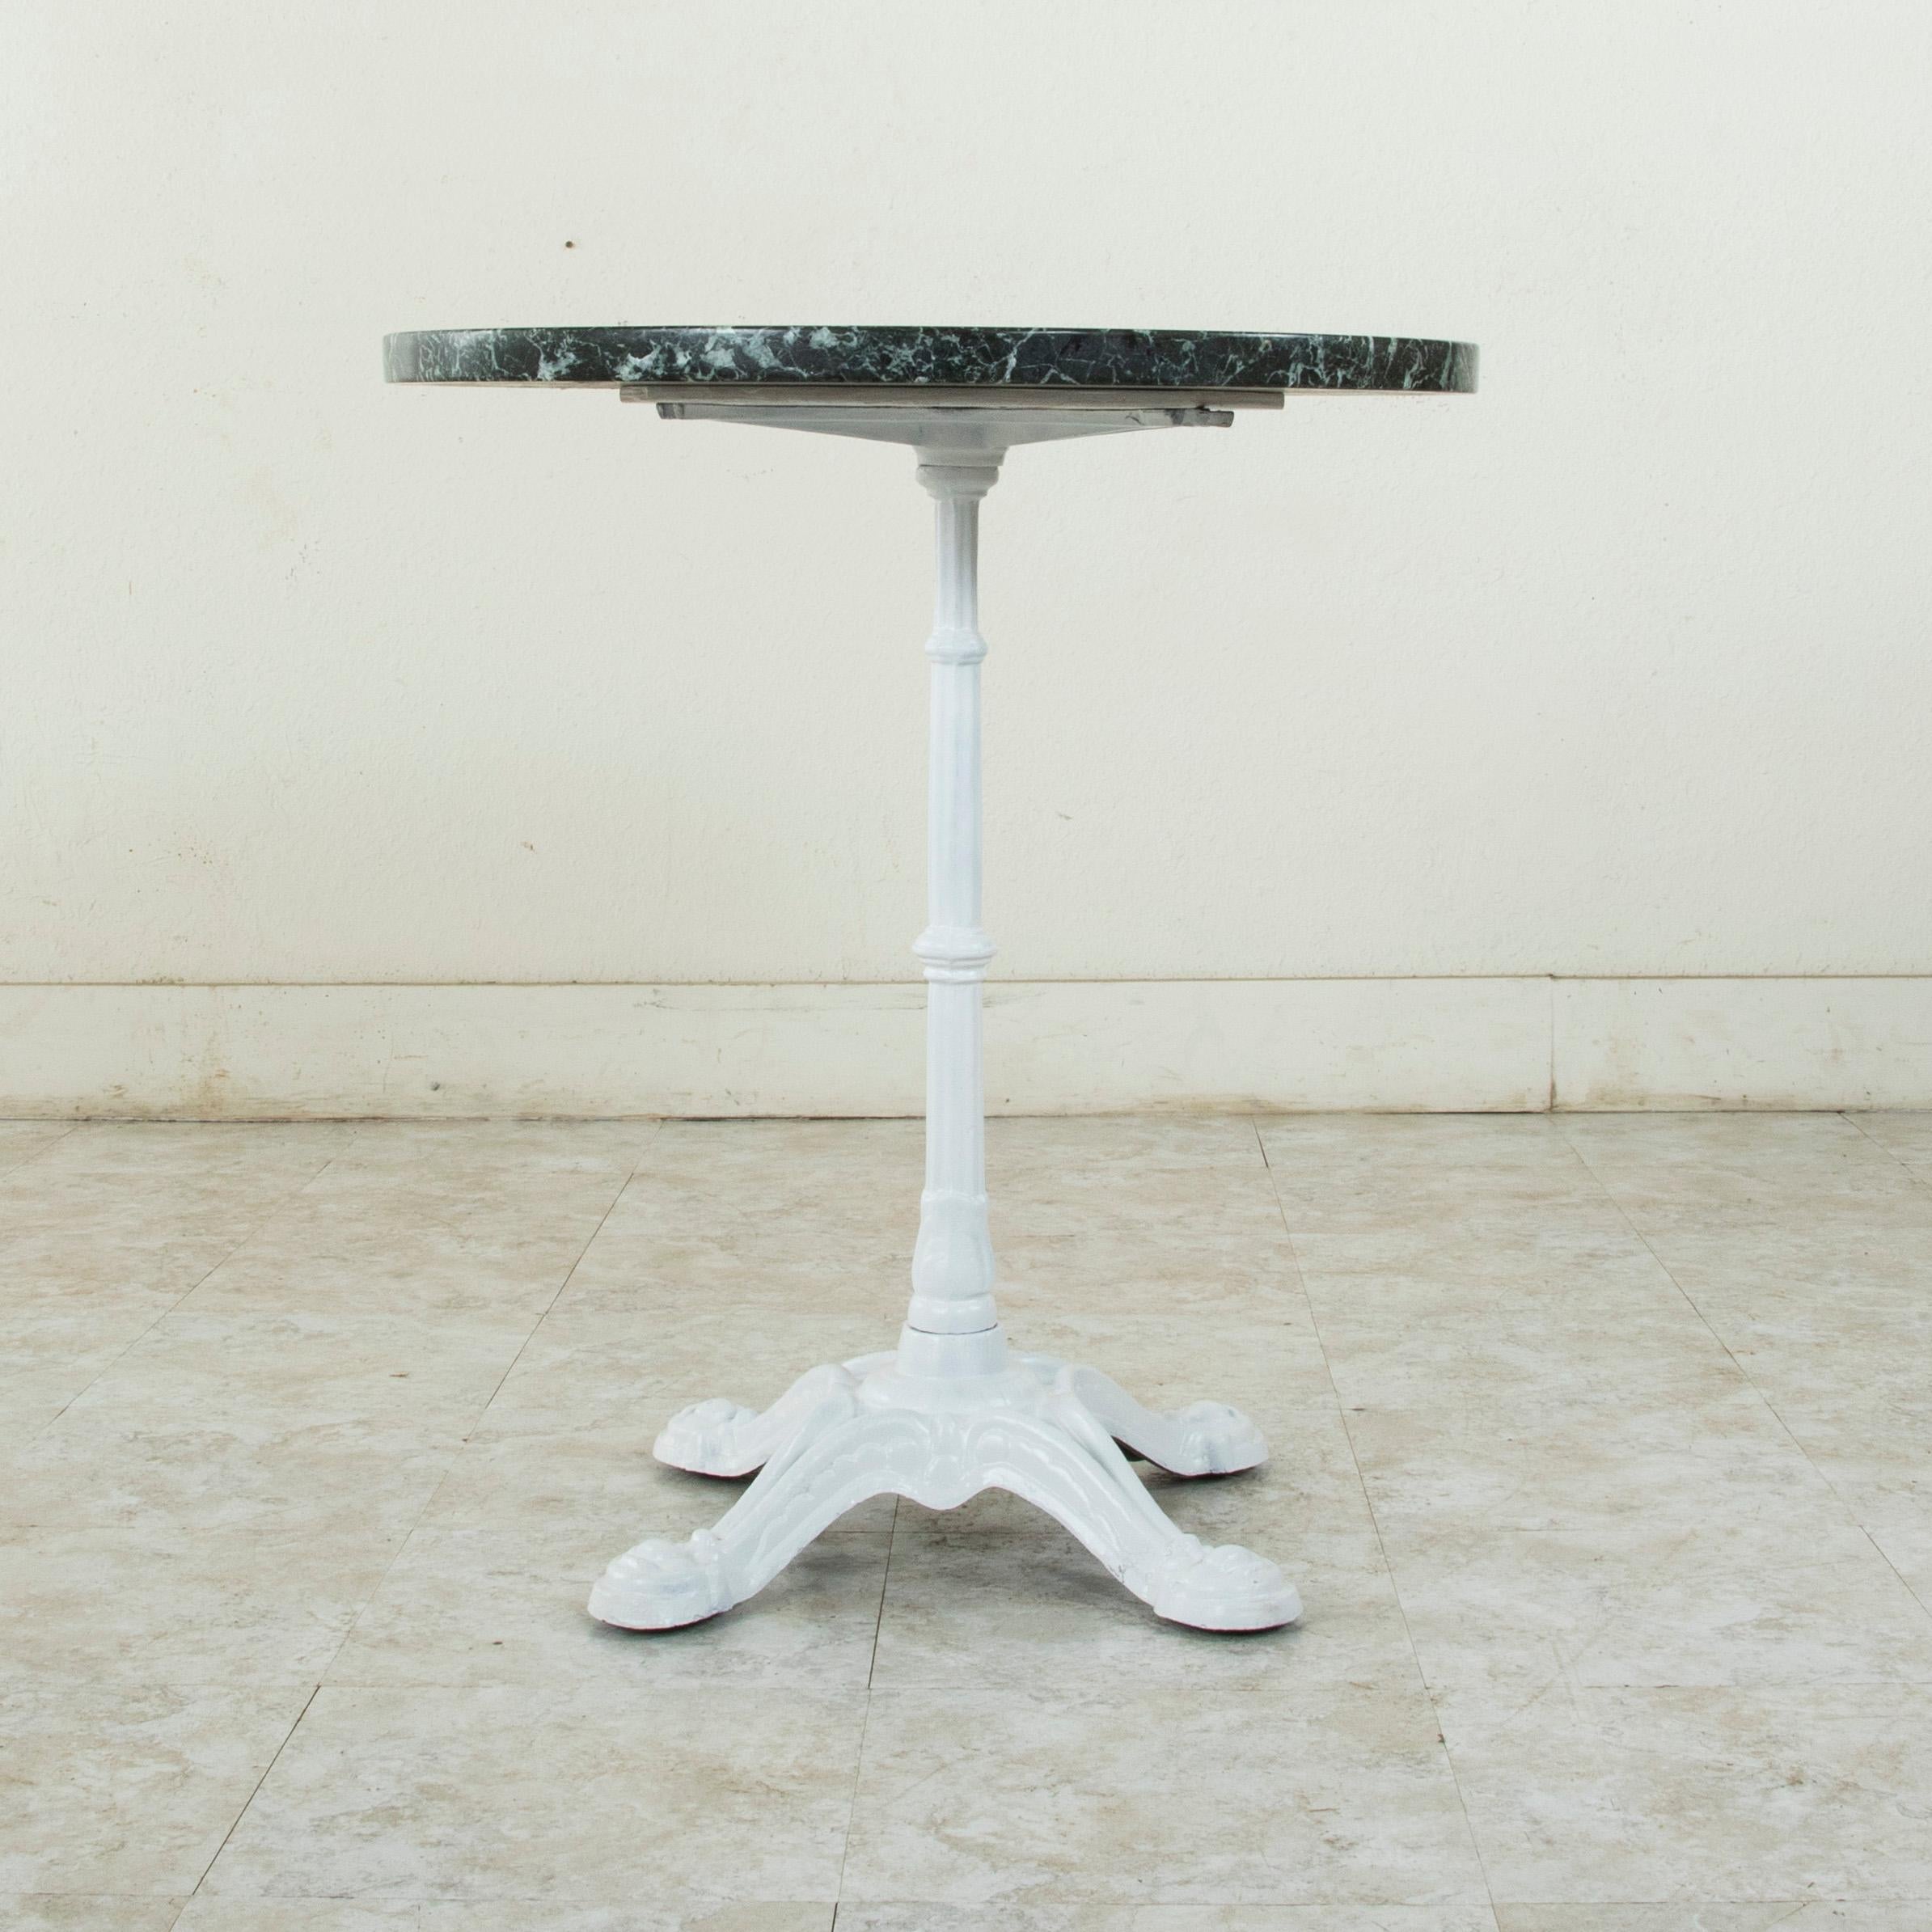 This early 20th century French bistro table features a cast iron base and a solid 1.25 inch thick circular green marble top with white veining. The marble top is supported by a central fluted pillar that rests on four legs. The marble sits on a